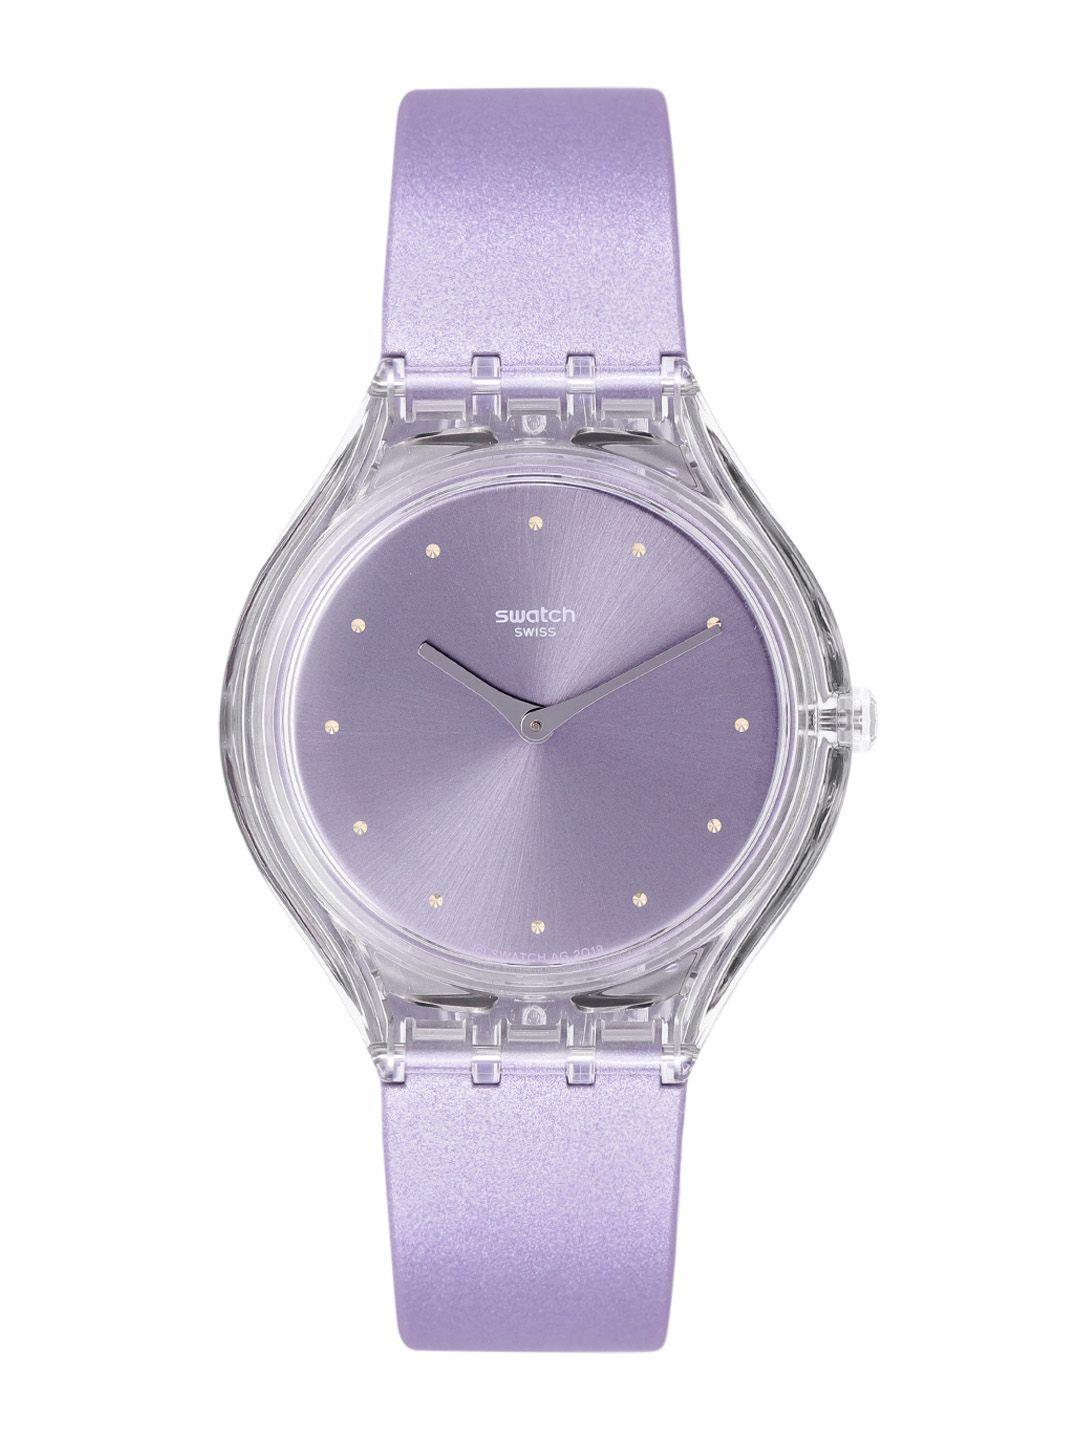 swatch-unisex-lavender-water-resistant-analogue-swiss-made-watch-svok110